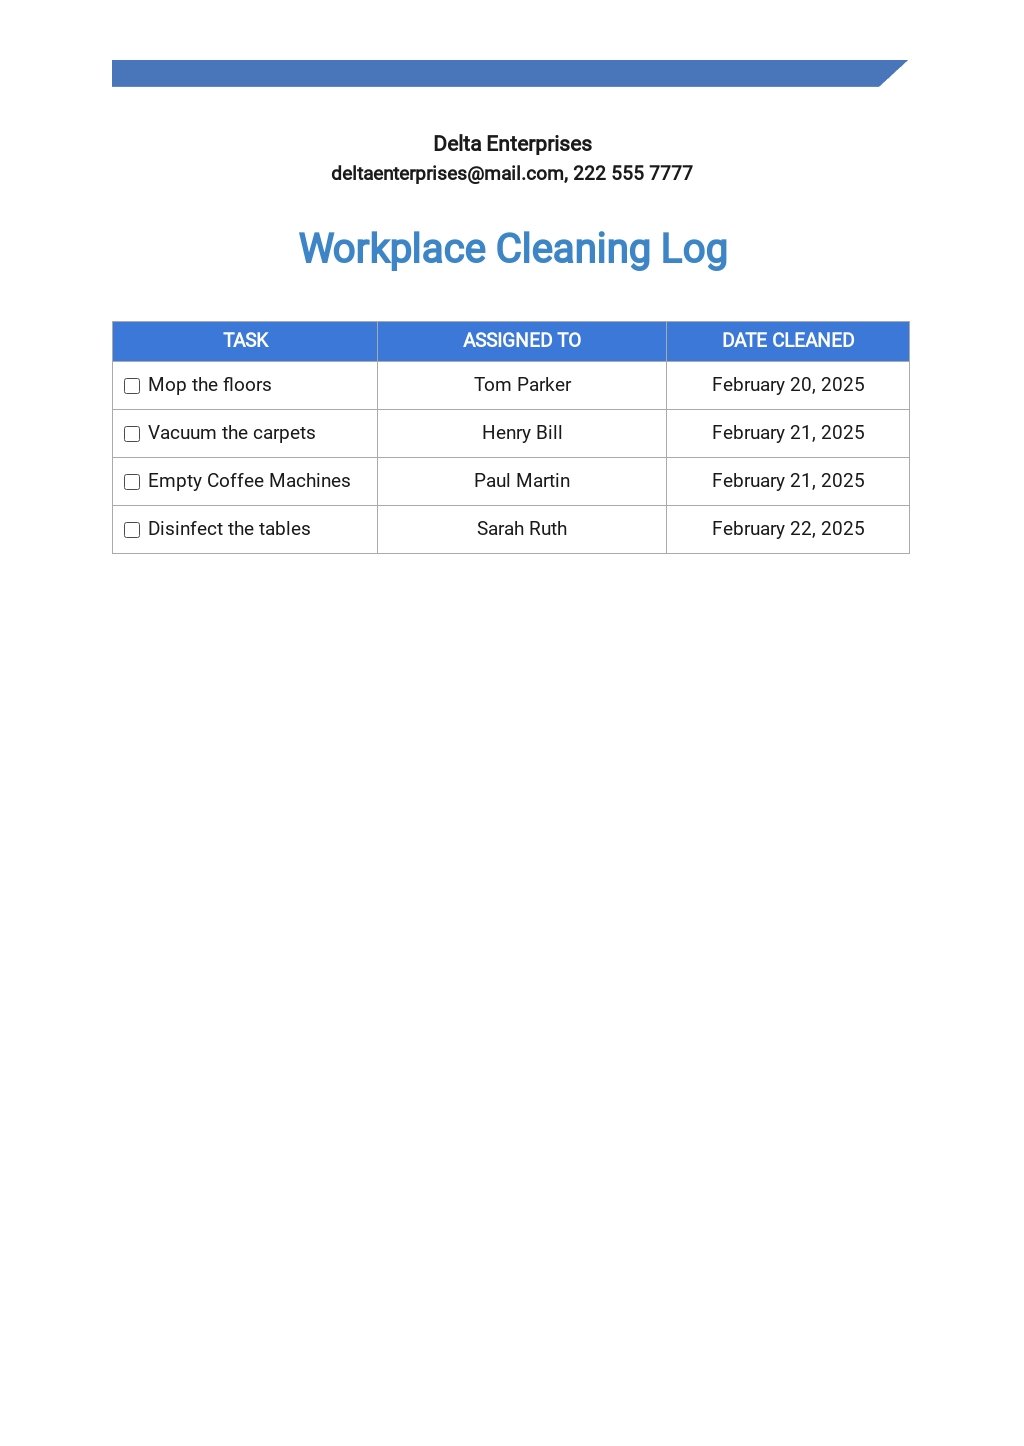 Workplace Cleaning Log Template.jpe